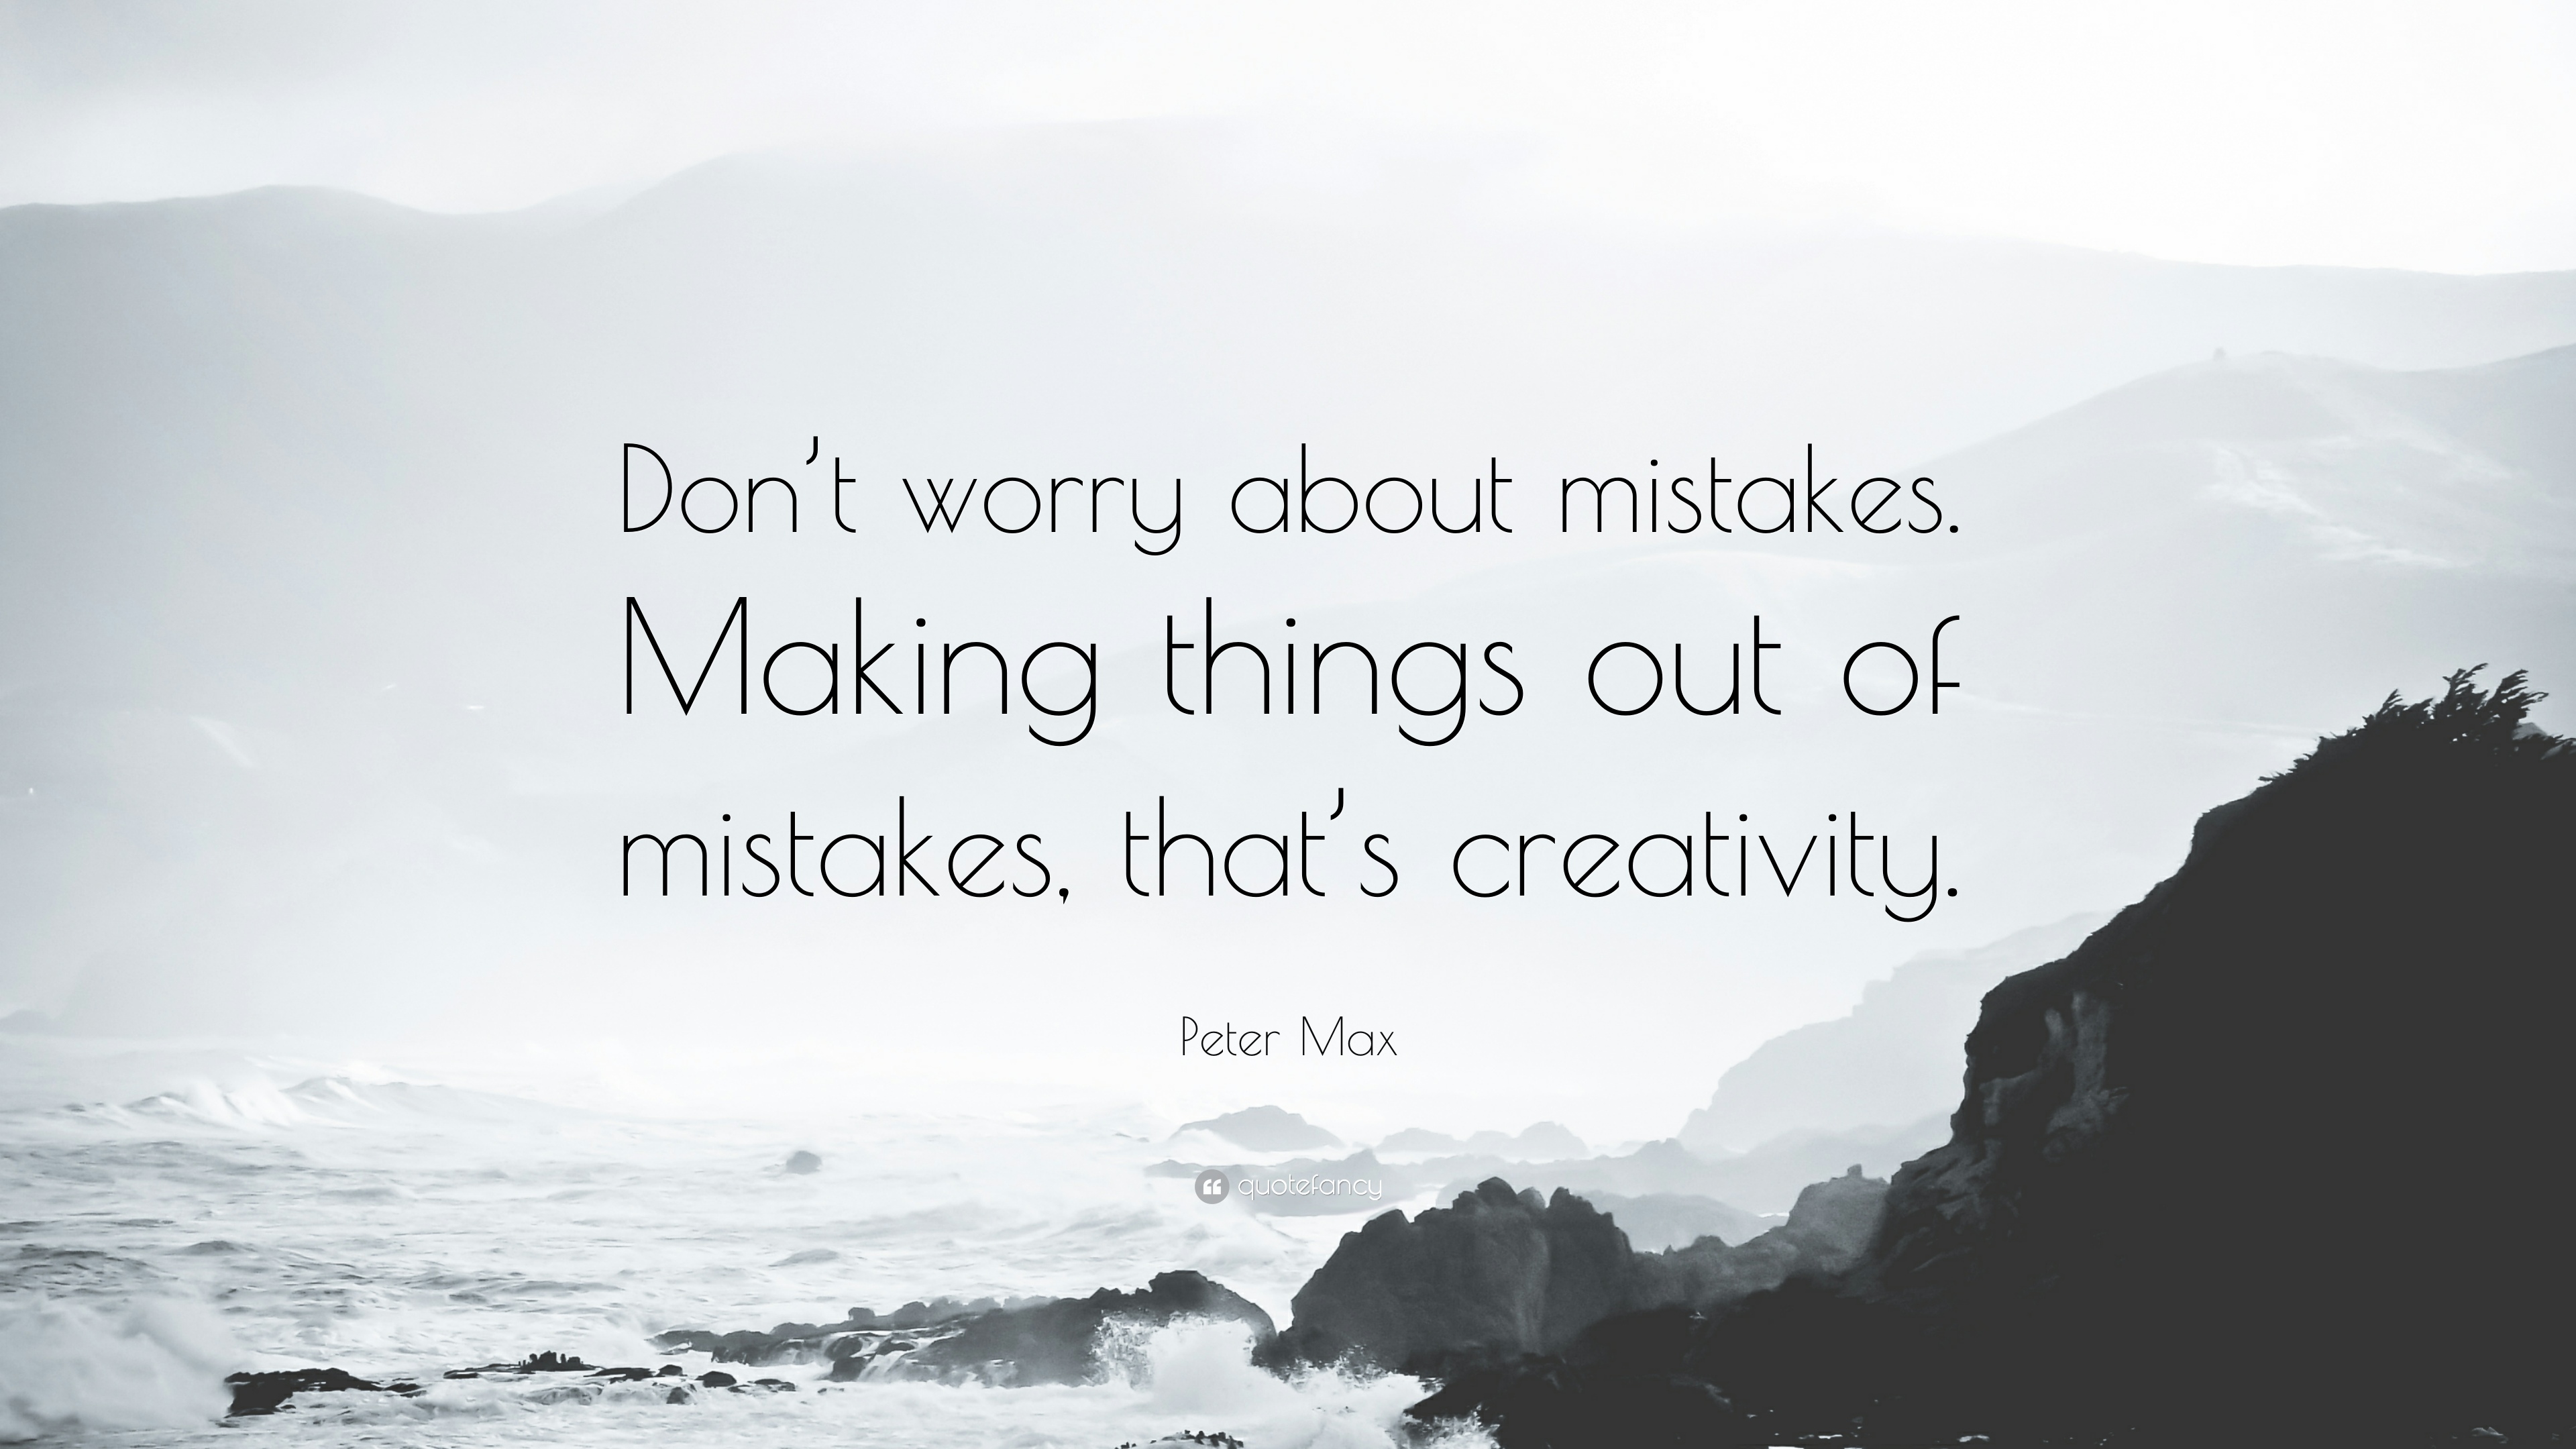 Peter Max Quote: “Don't worry about mistakes. Making things out of mistakes, that's creativity.”